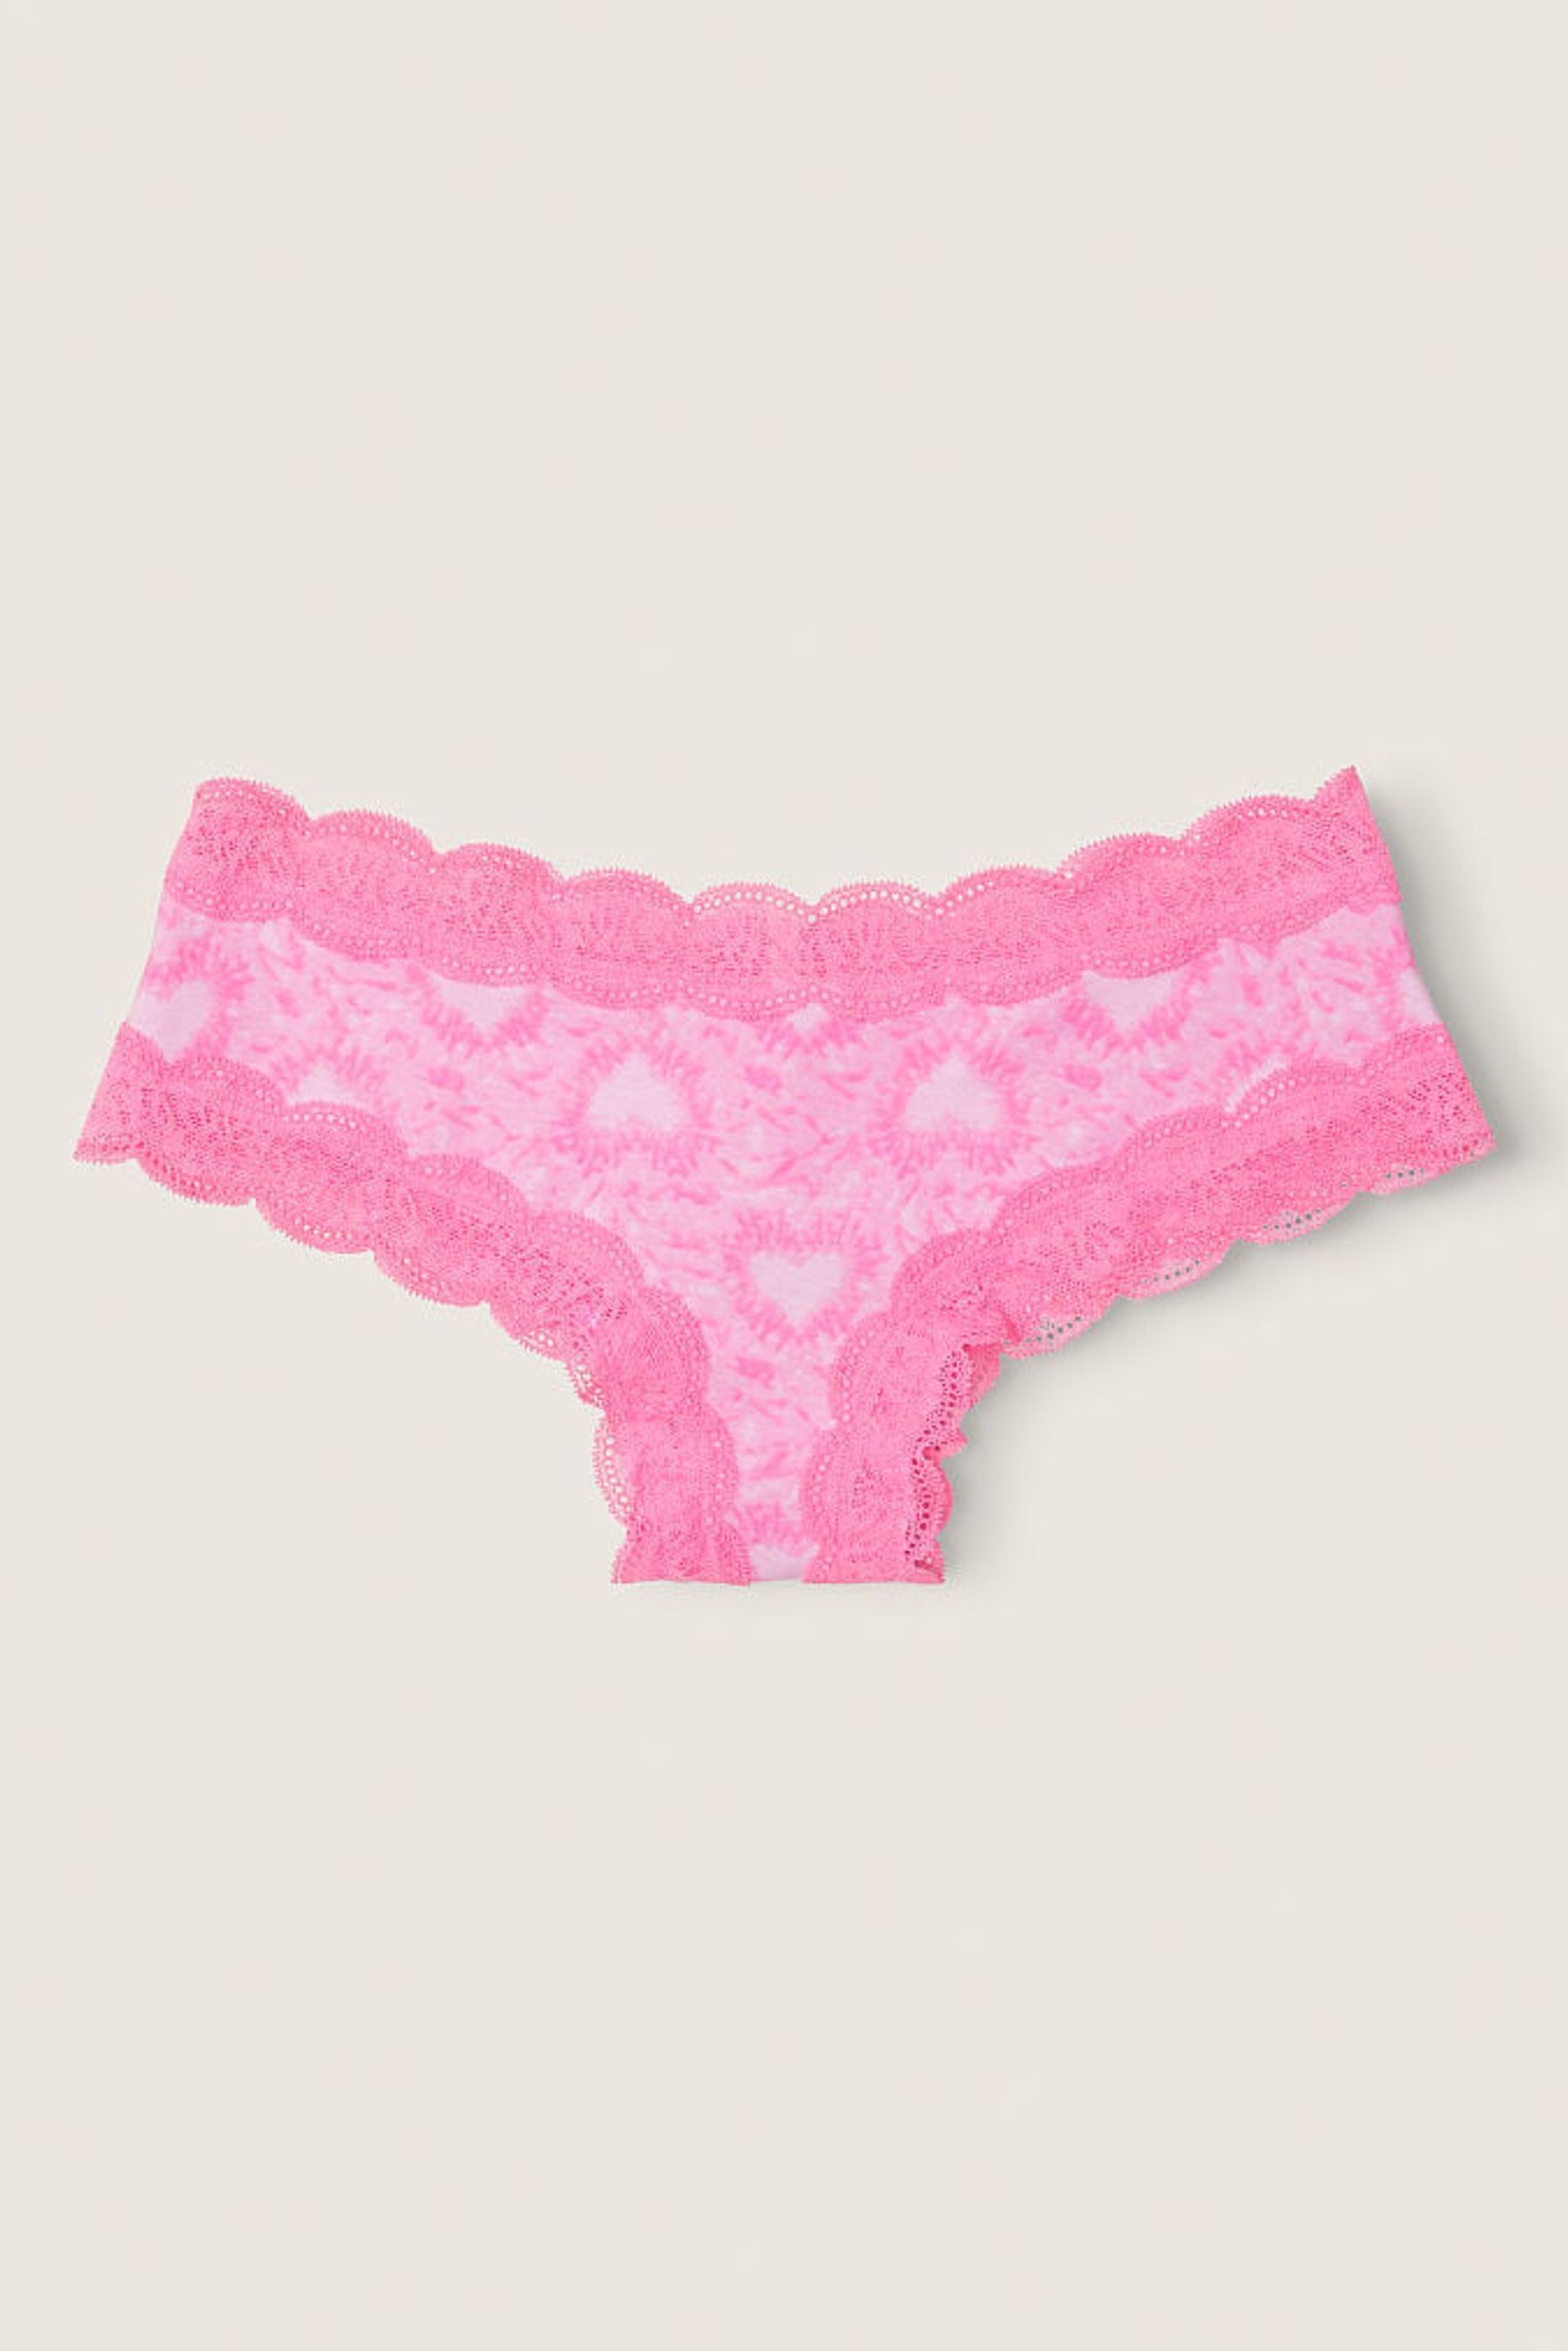 Buy Victoria S Secret Pink Lace Trim Cheeky Knickers From The Victoria S Secret Uk Online Shop